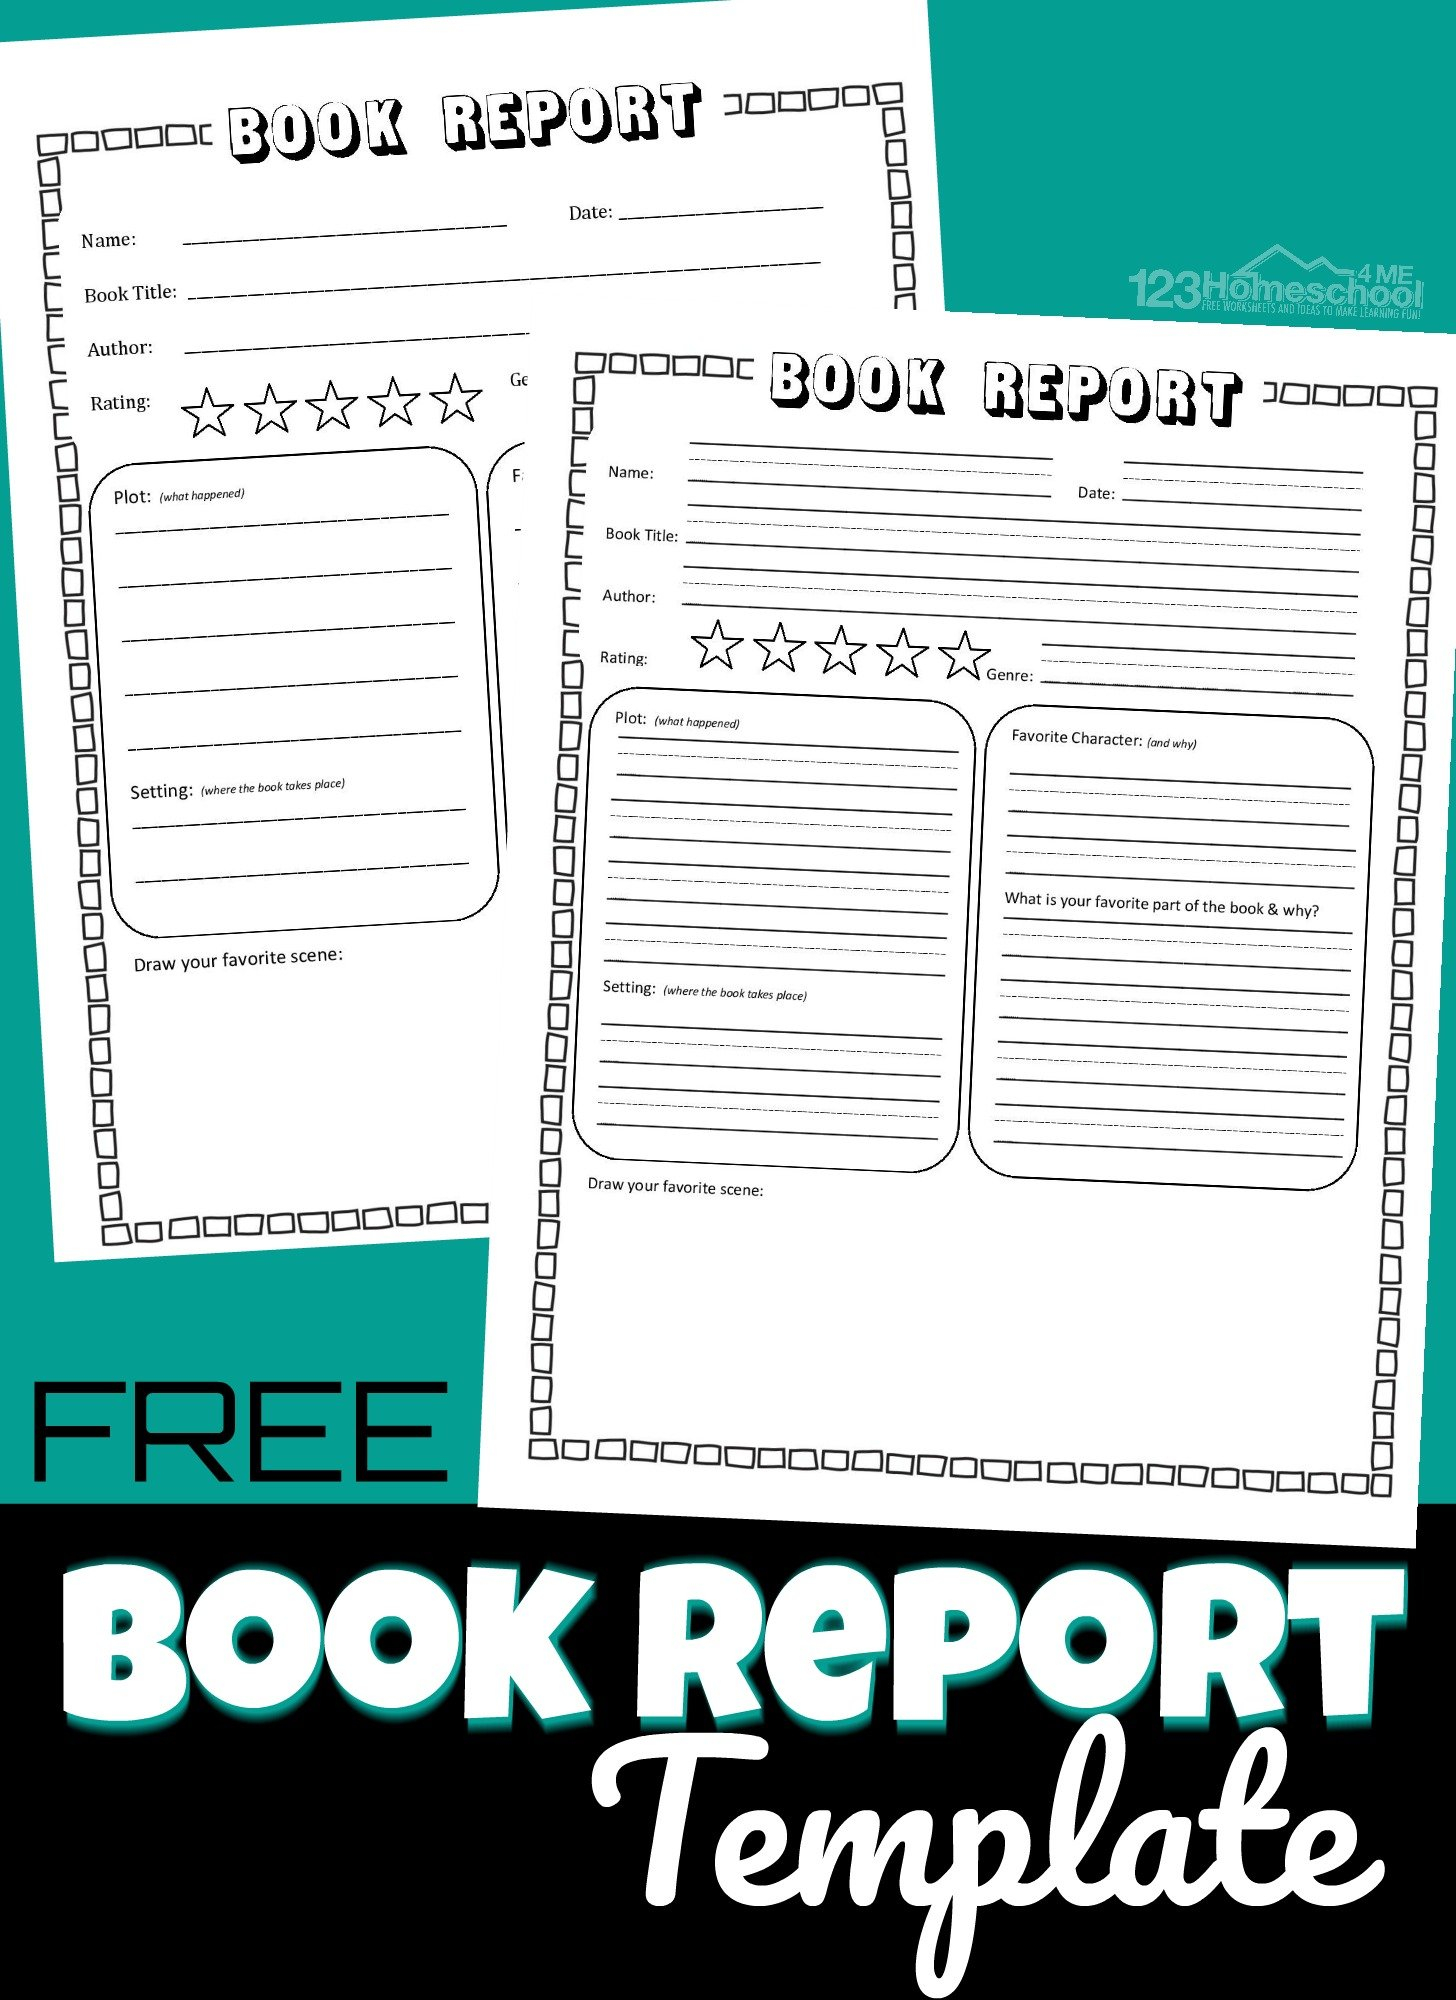 FREE Simple Book Report Template - 10 Homeschool 10 Me With Regard To First Grade Book Report Template